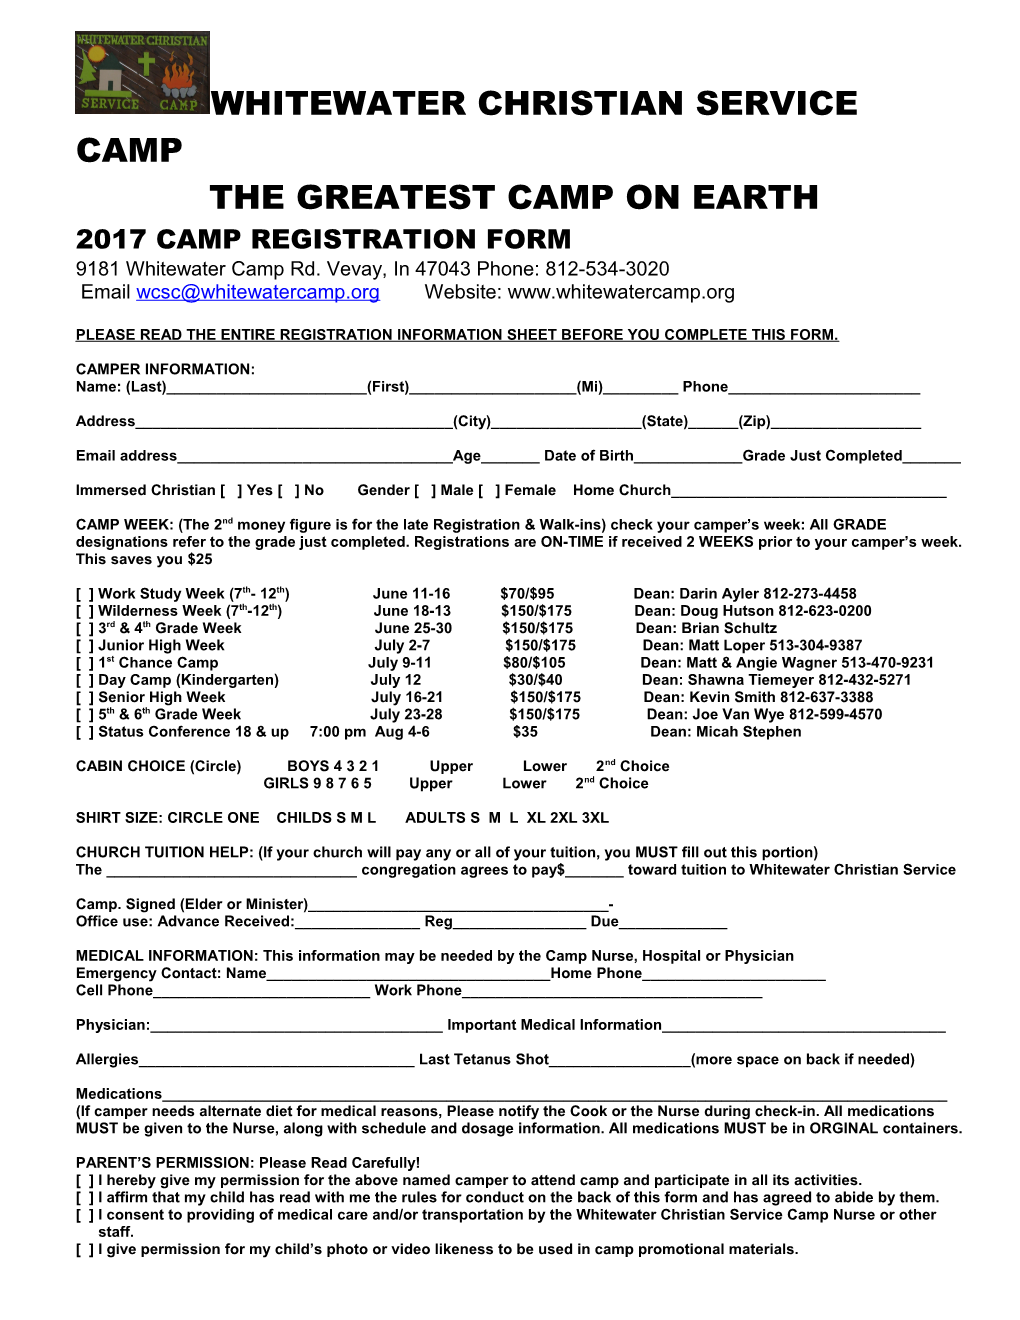 The Greatest Camp on Earth